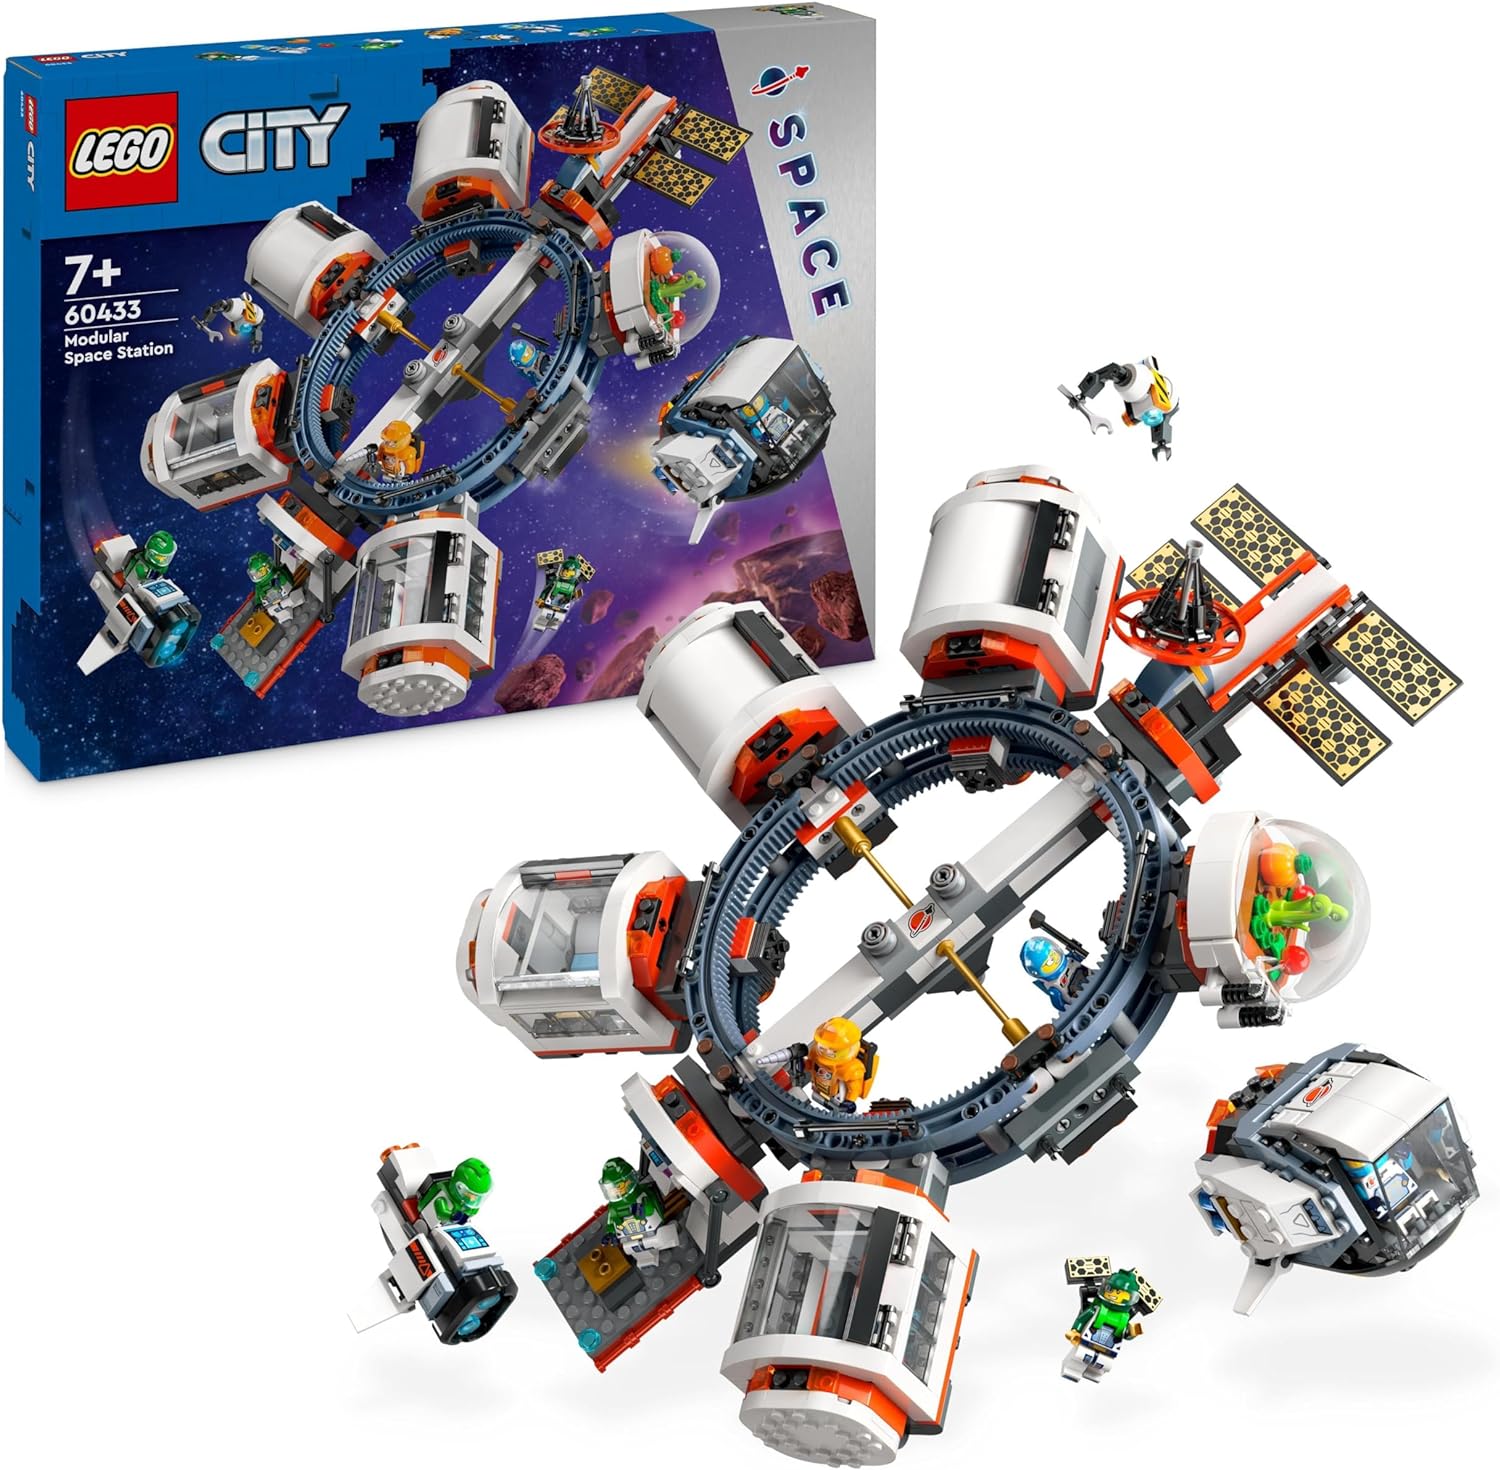 LEGO City Space Modular Space Station, Spaceship Model with Space Vehicles, Gift for Children, Boys and Girls from 7 Years, Modular Research Station with 6 Astronaut Figures 60433